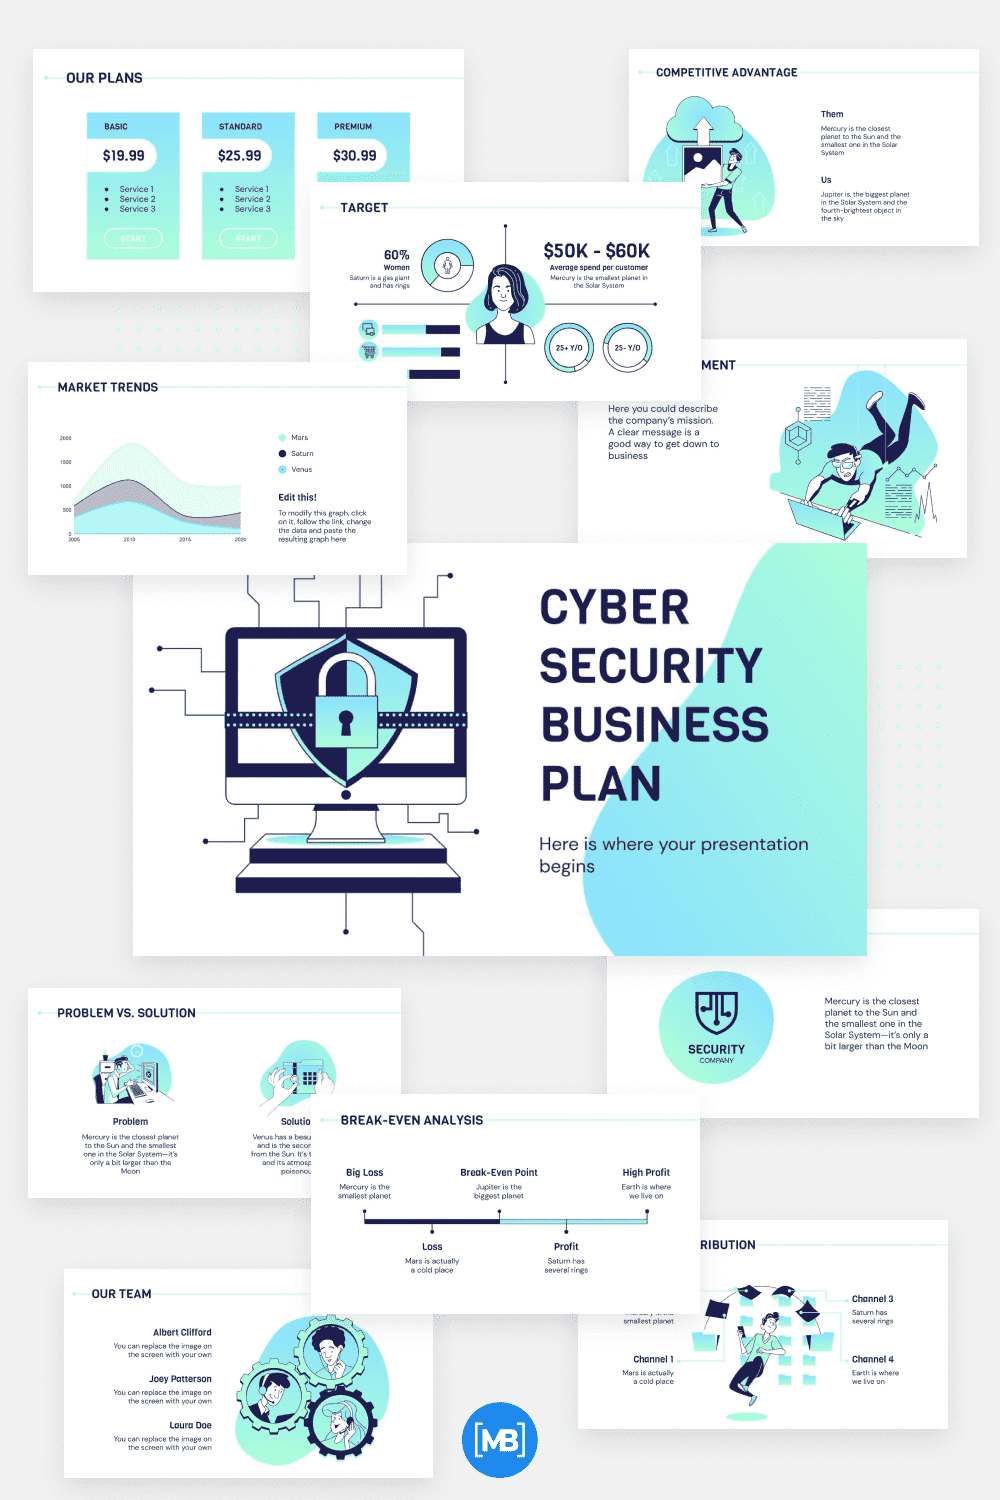 Cyber Security business plan.